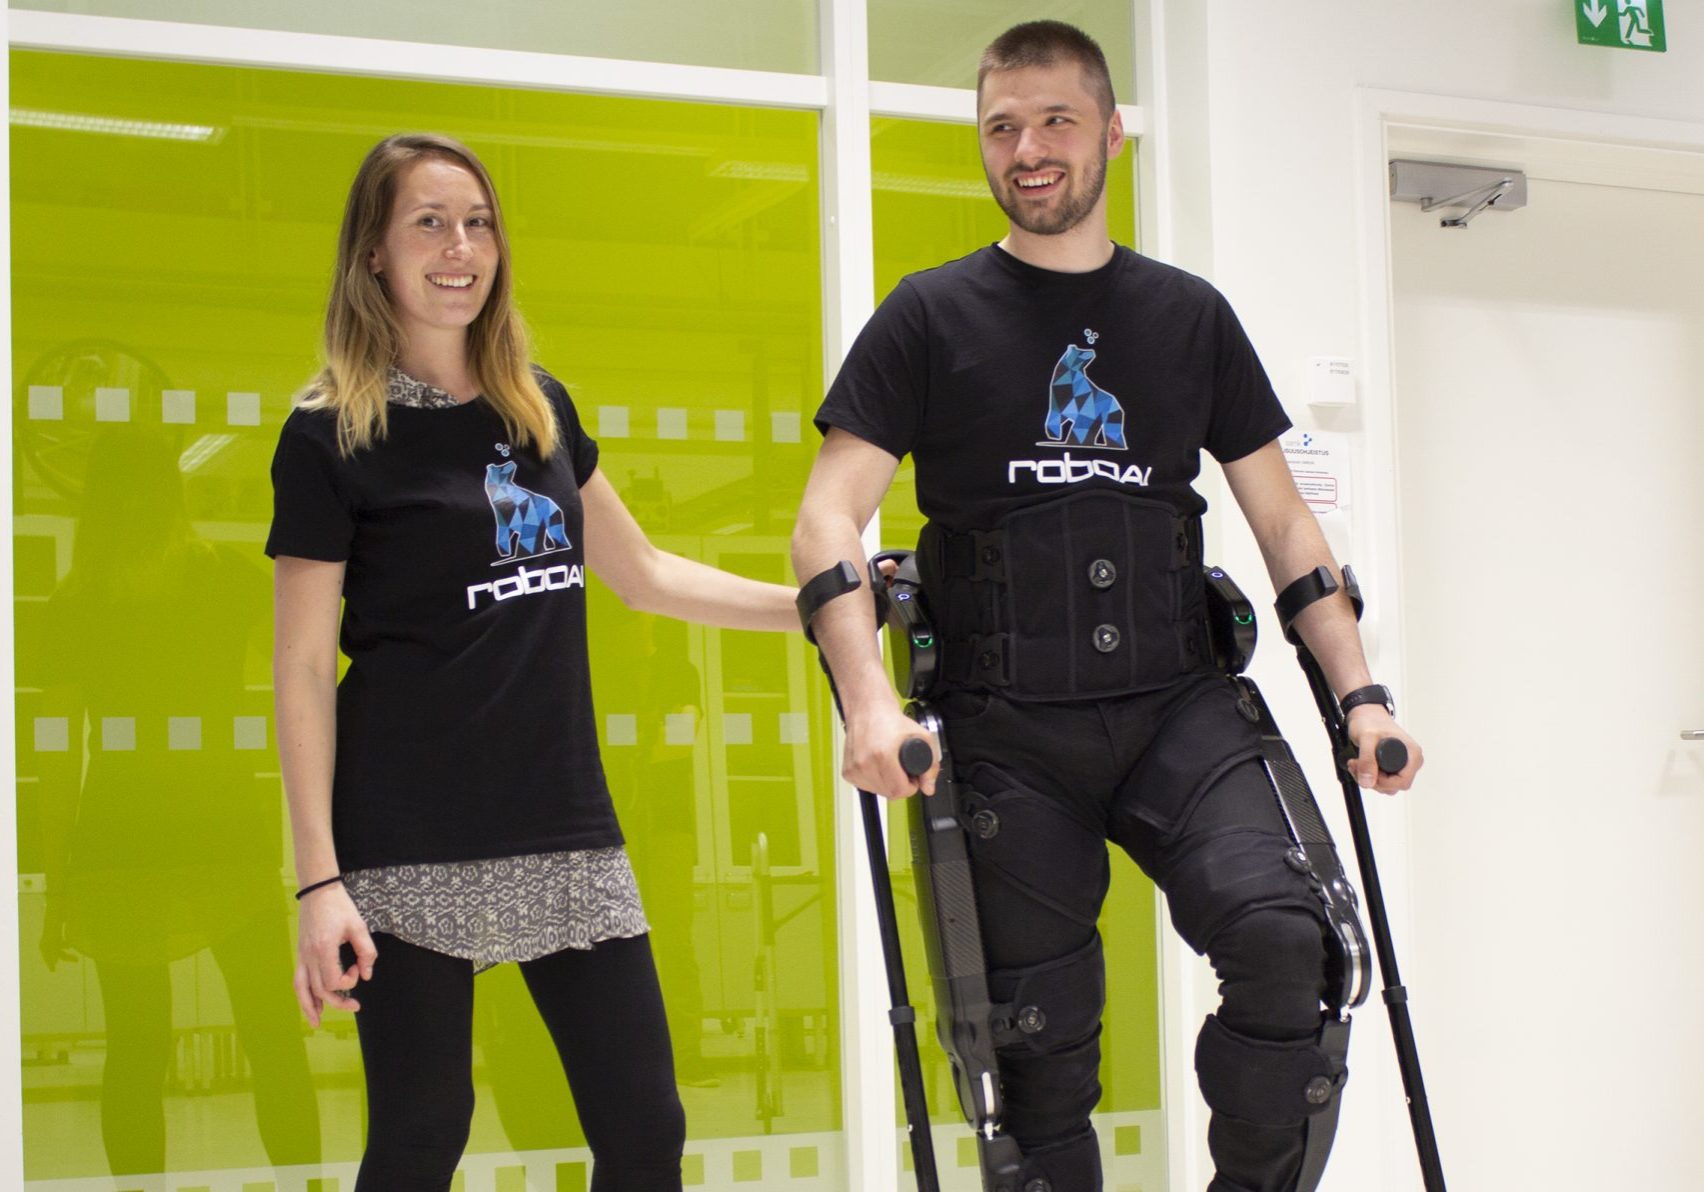 The picture shows a woman and a man using an exoskeleton walking robot.